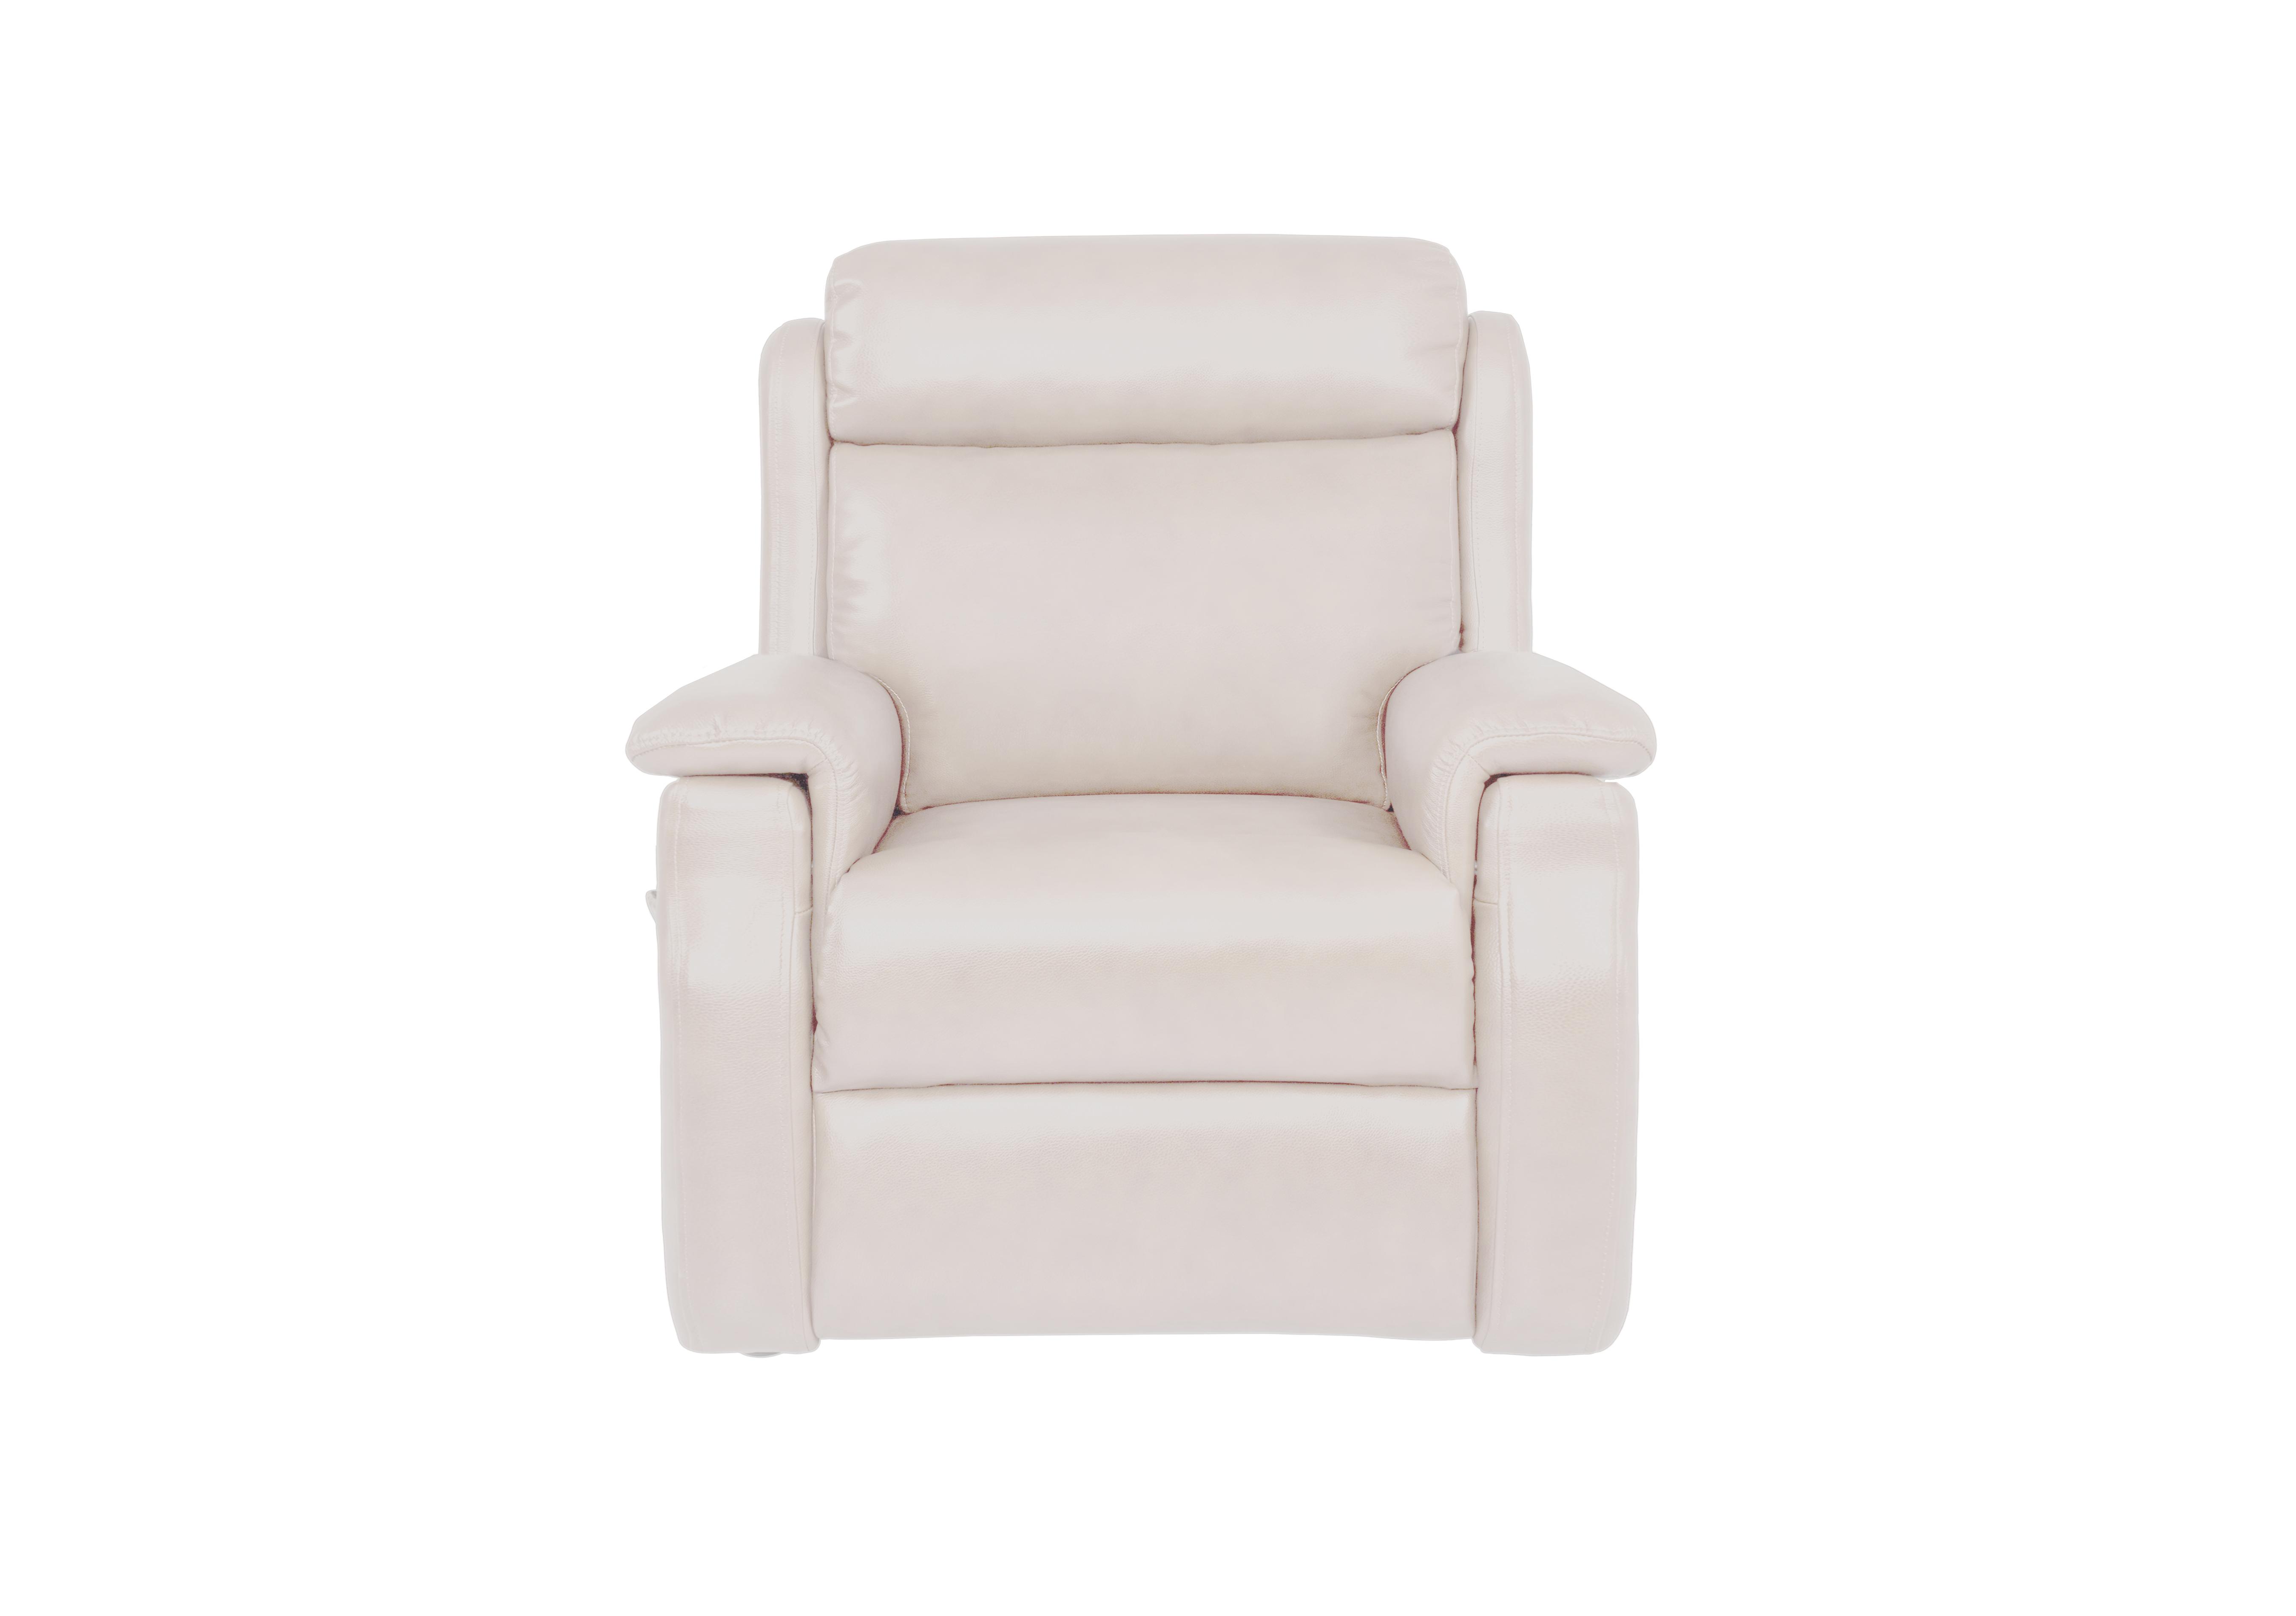 My Chair Kirk Leather Lift and Rise Chair in Cat-40/13 Montana Cotton on Furniture Village